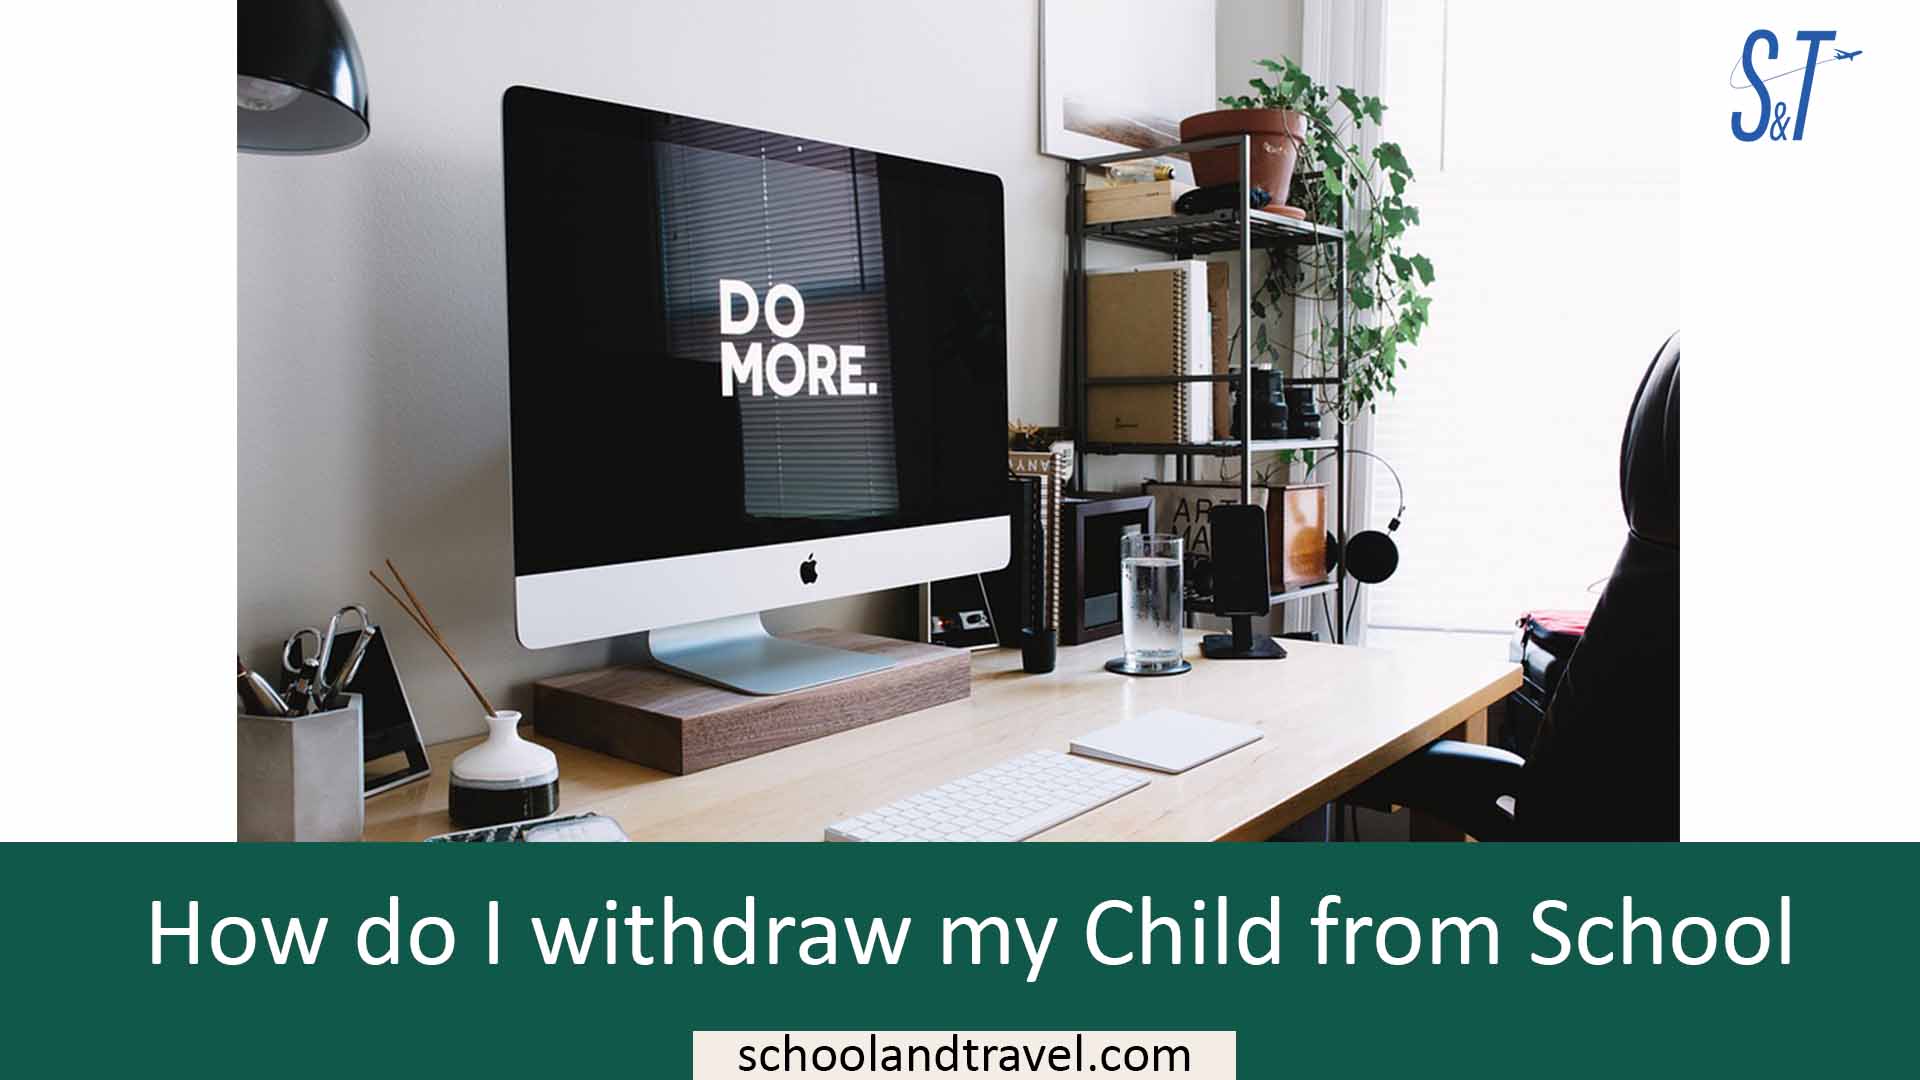 How do I withdraw my child from school